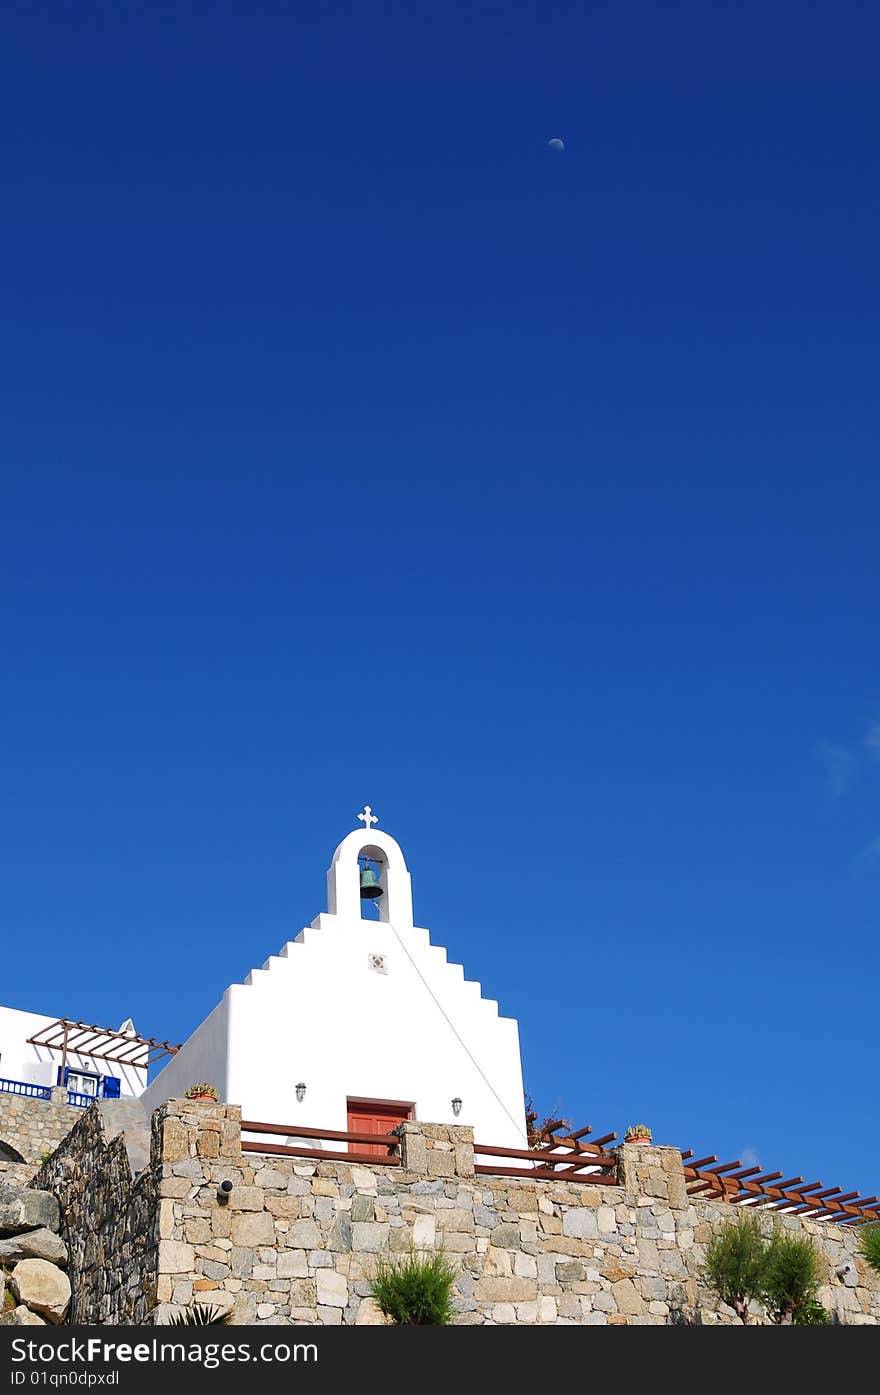 A white church and blue sky in Greece